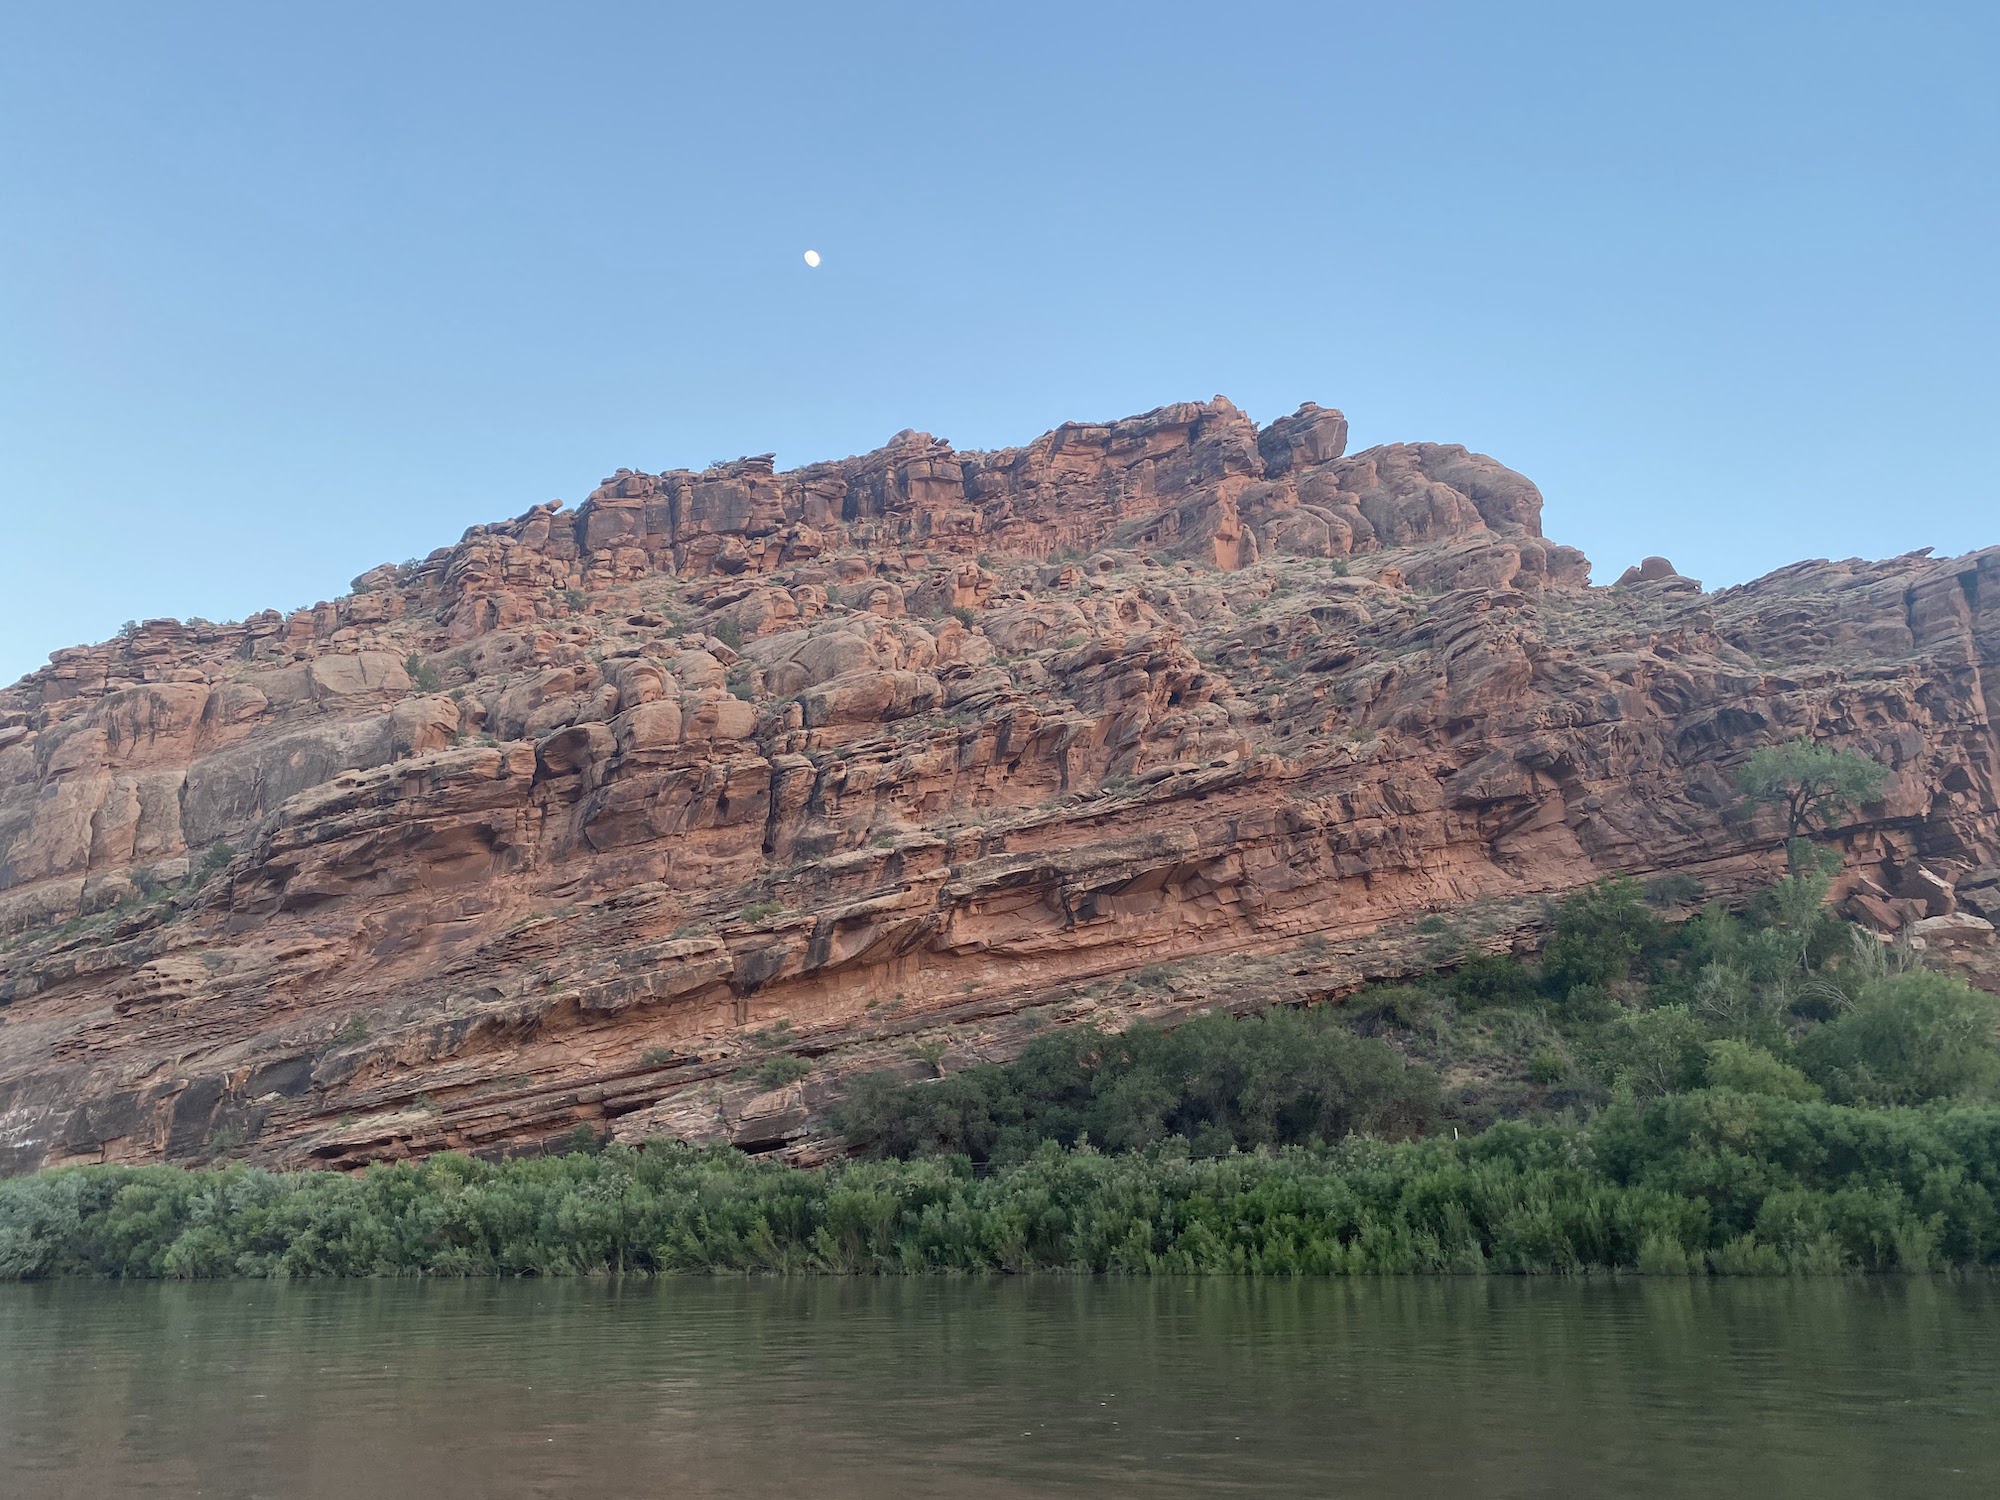 The moon over tilted layers of rock along the Colorado River